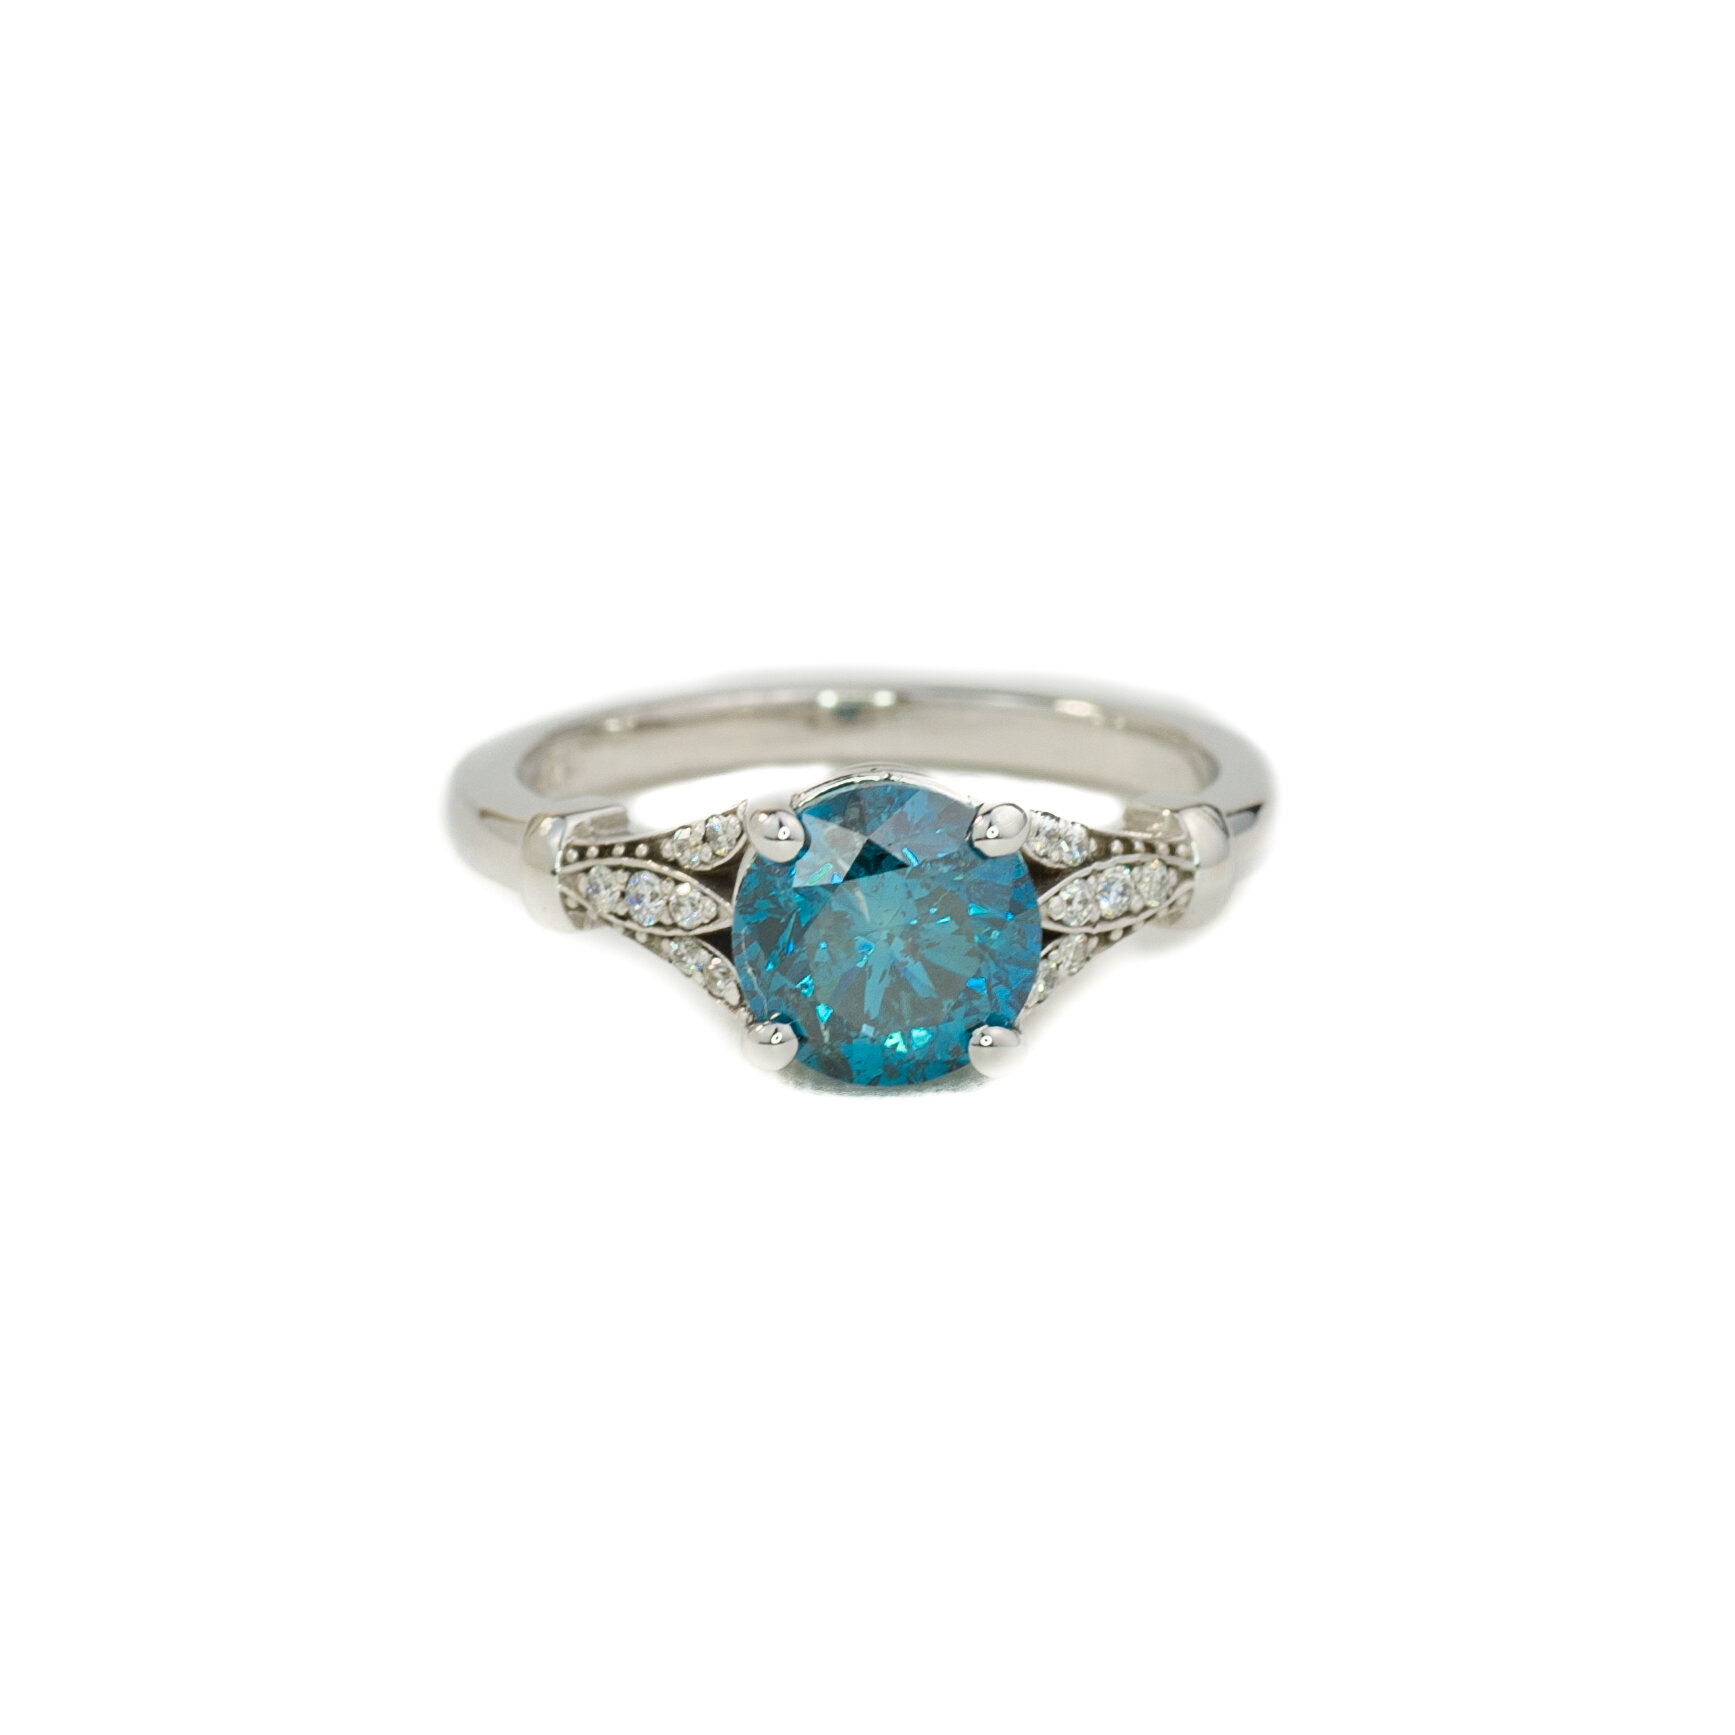 Irradiated Blue Diamond Ring — Ethical Jewelry | Color Gemstones ...